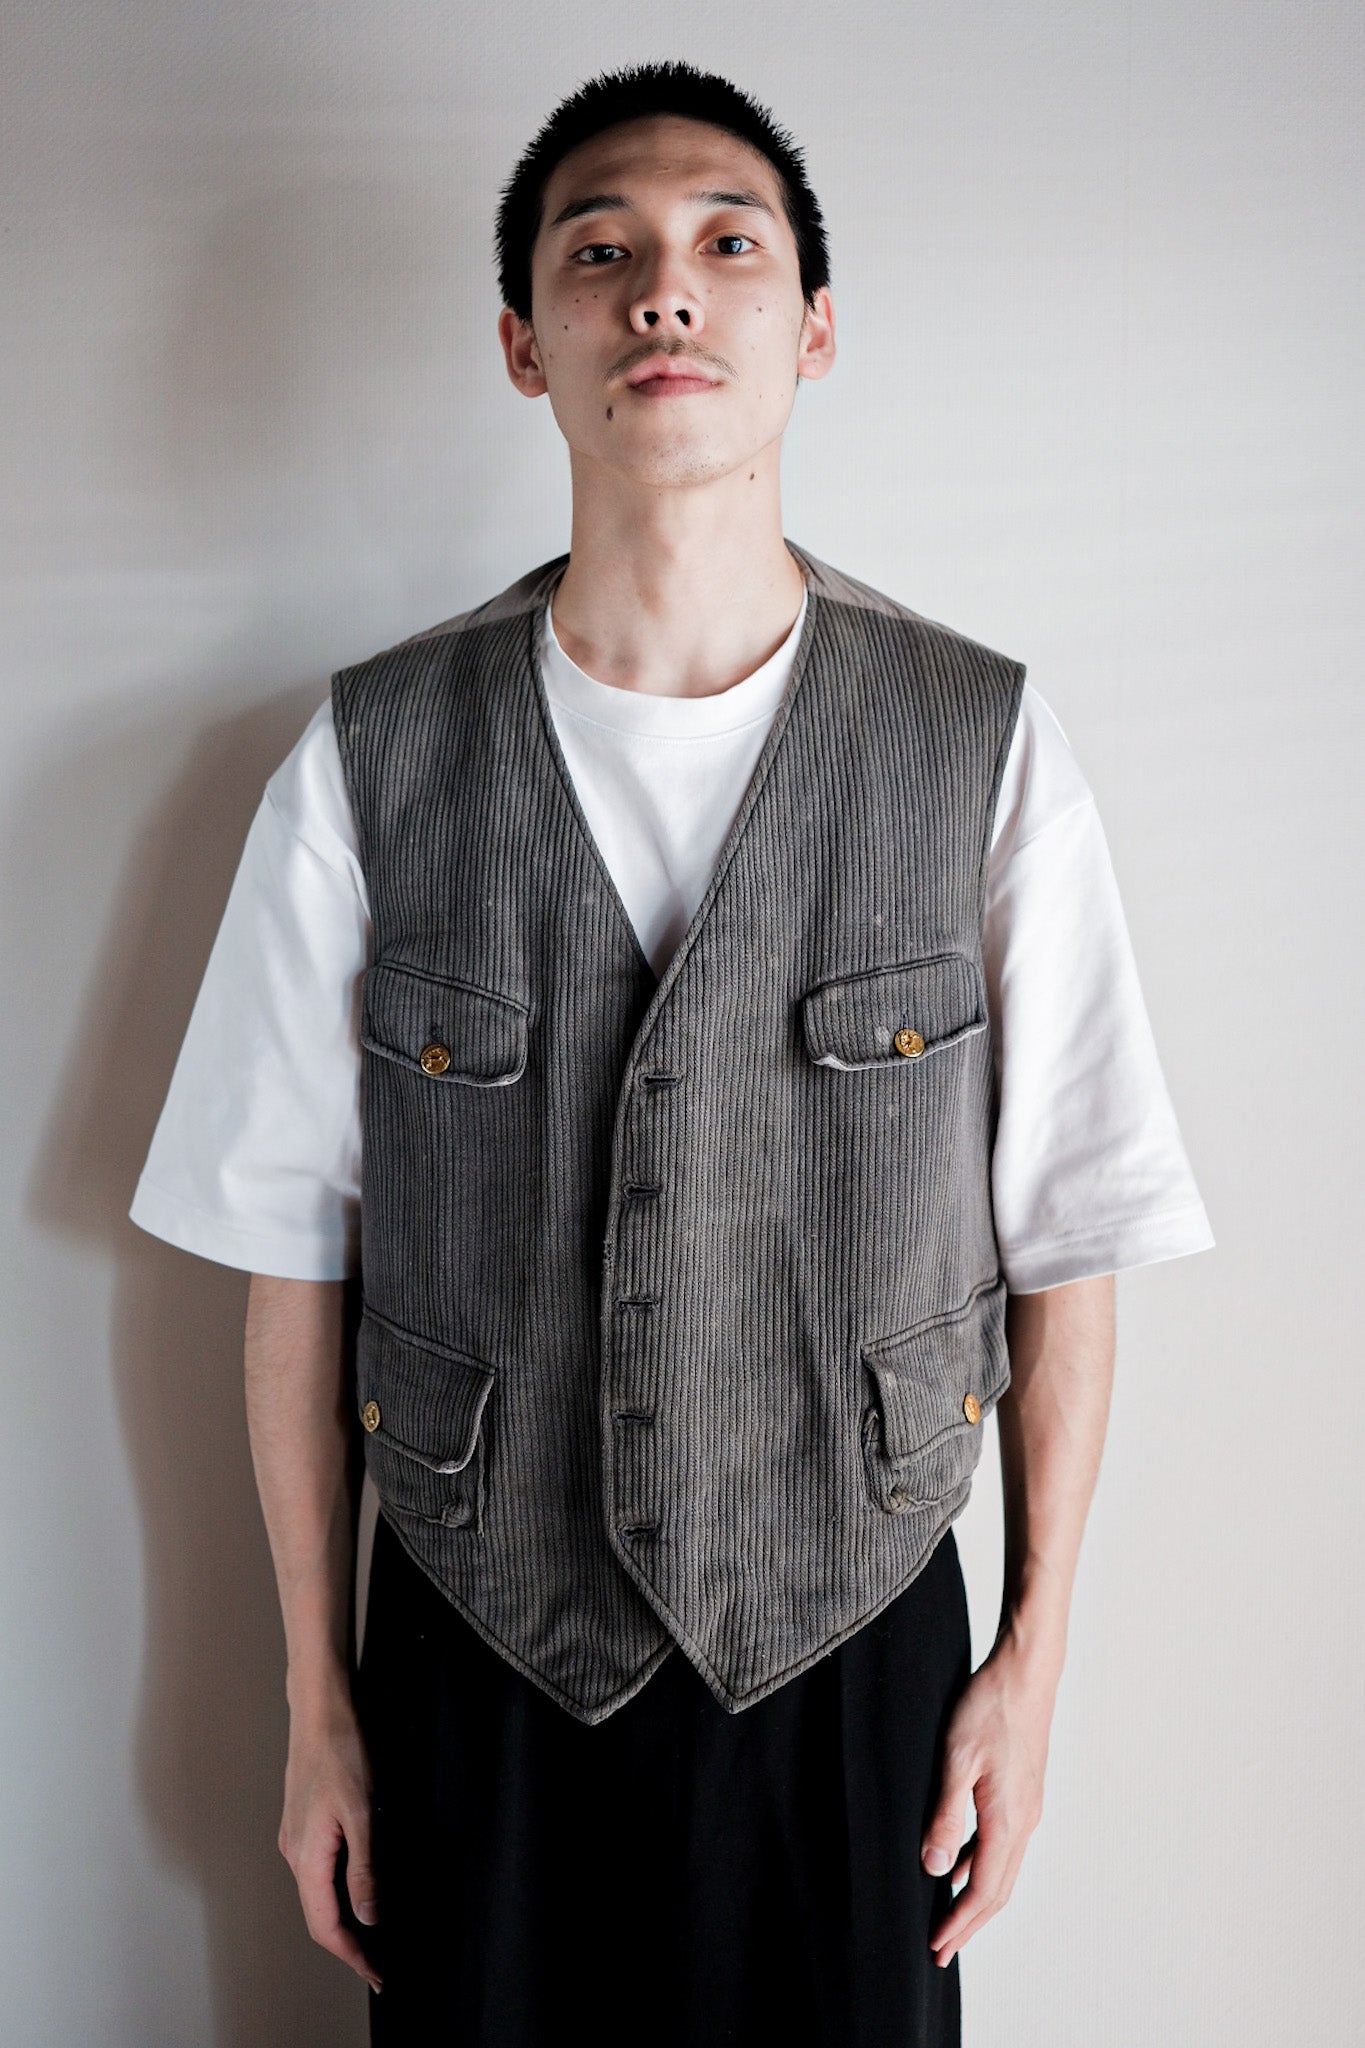 [~ 30's] French Vintage Gray Cotton Pique Hunting Gilet